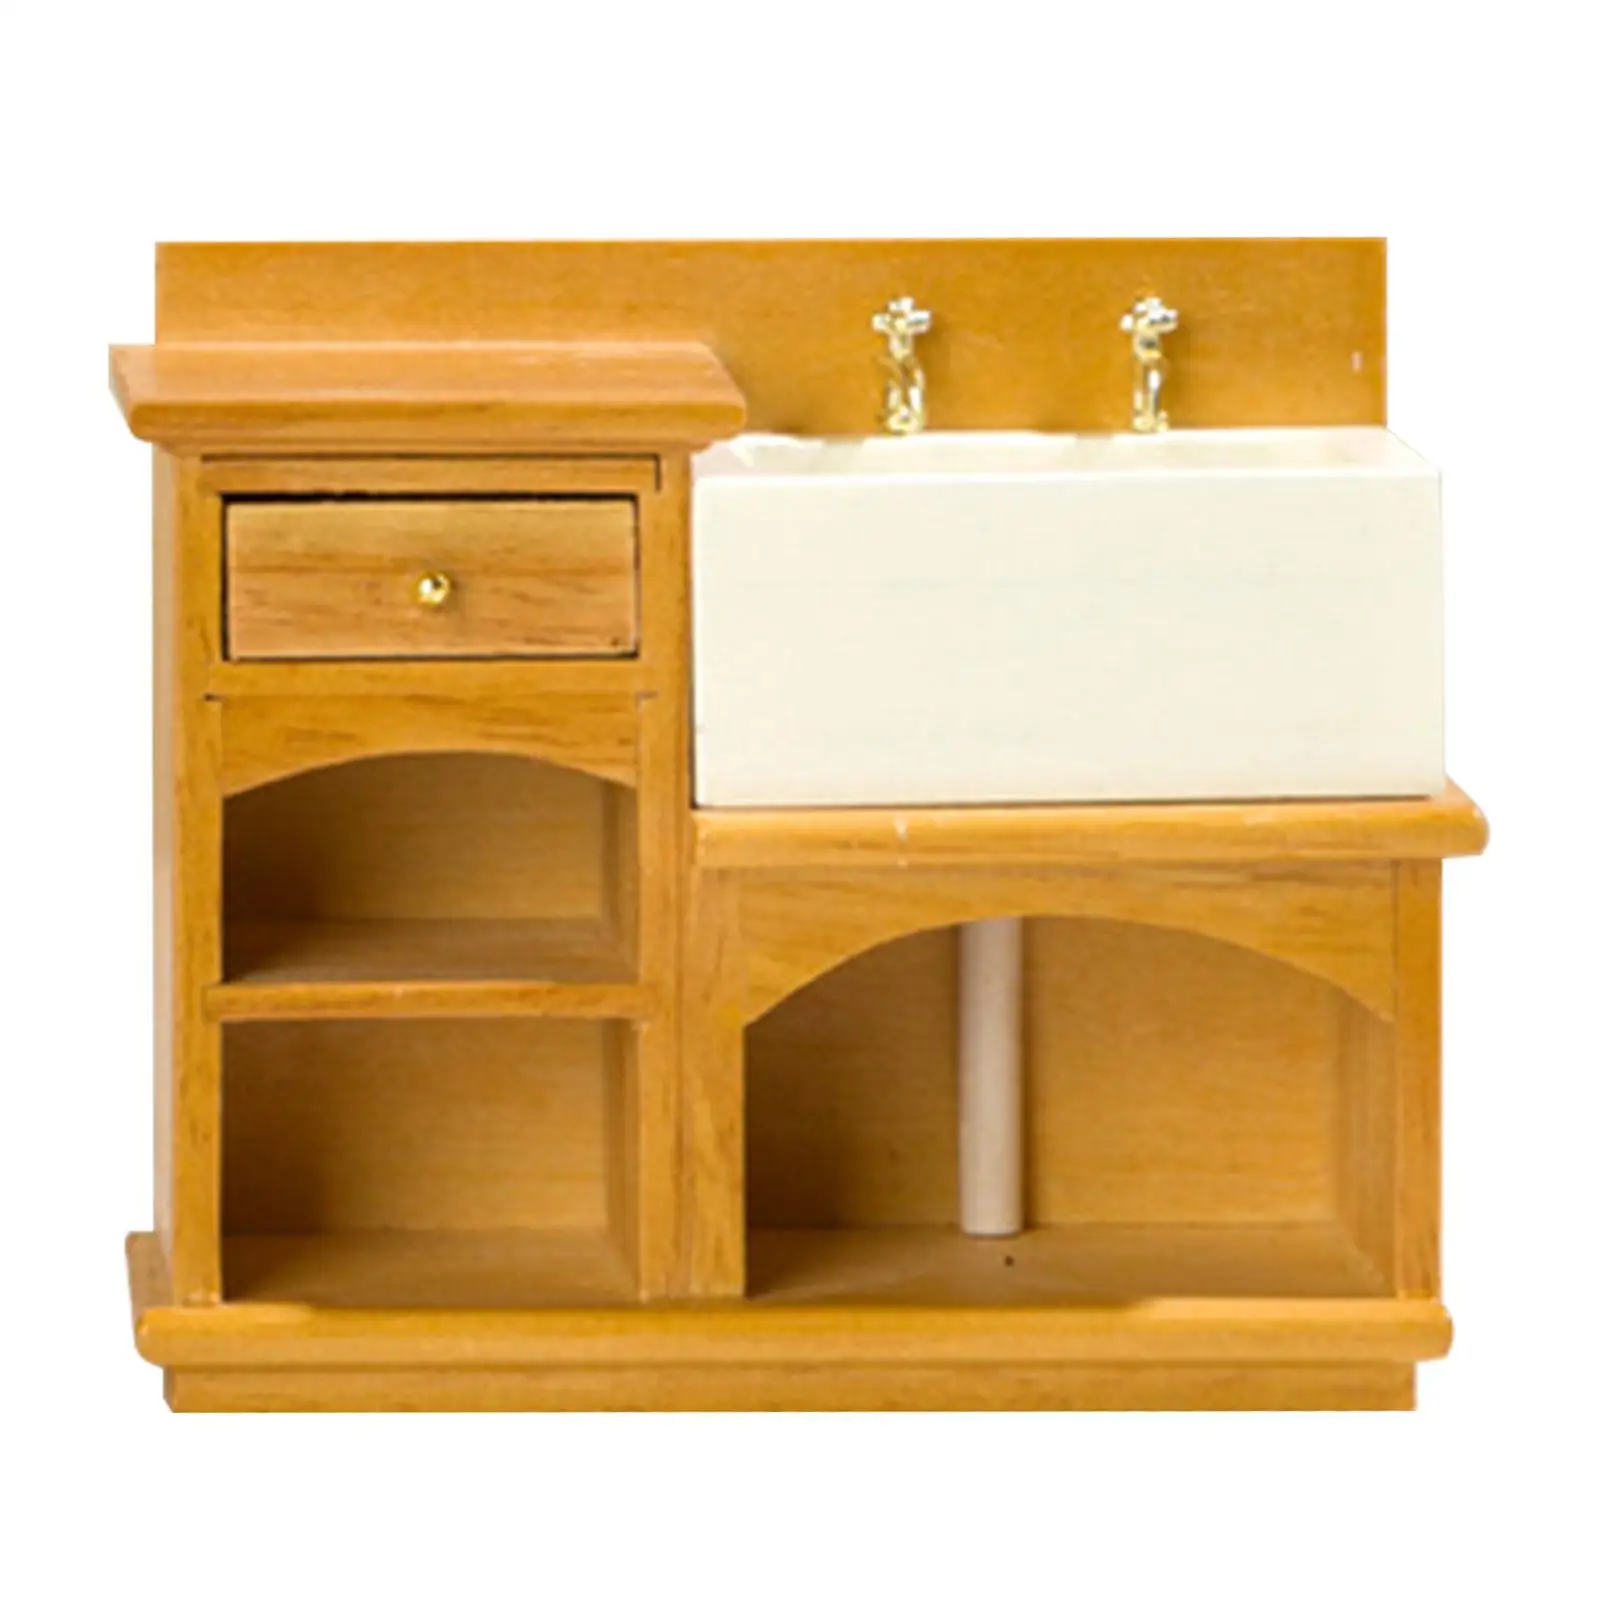 1:12 Dollhouse Wash Cabinet Model, 1:12 Wash Cabinet Model, 1:12 Miniature Cabinet Furniture for Holiday Present